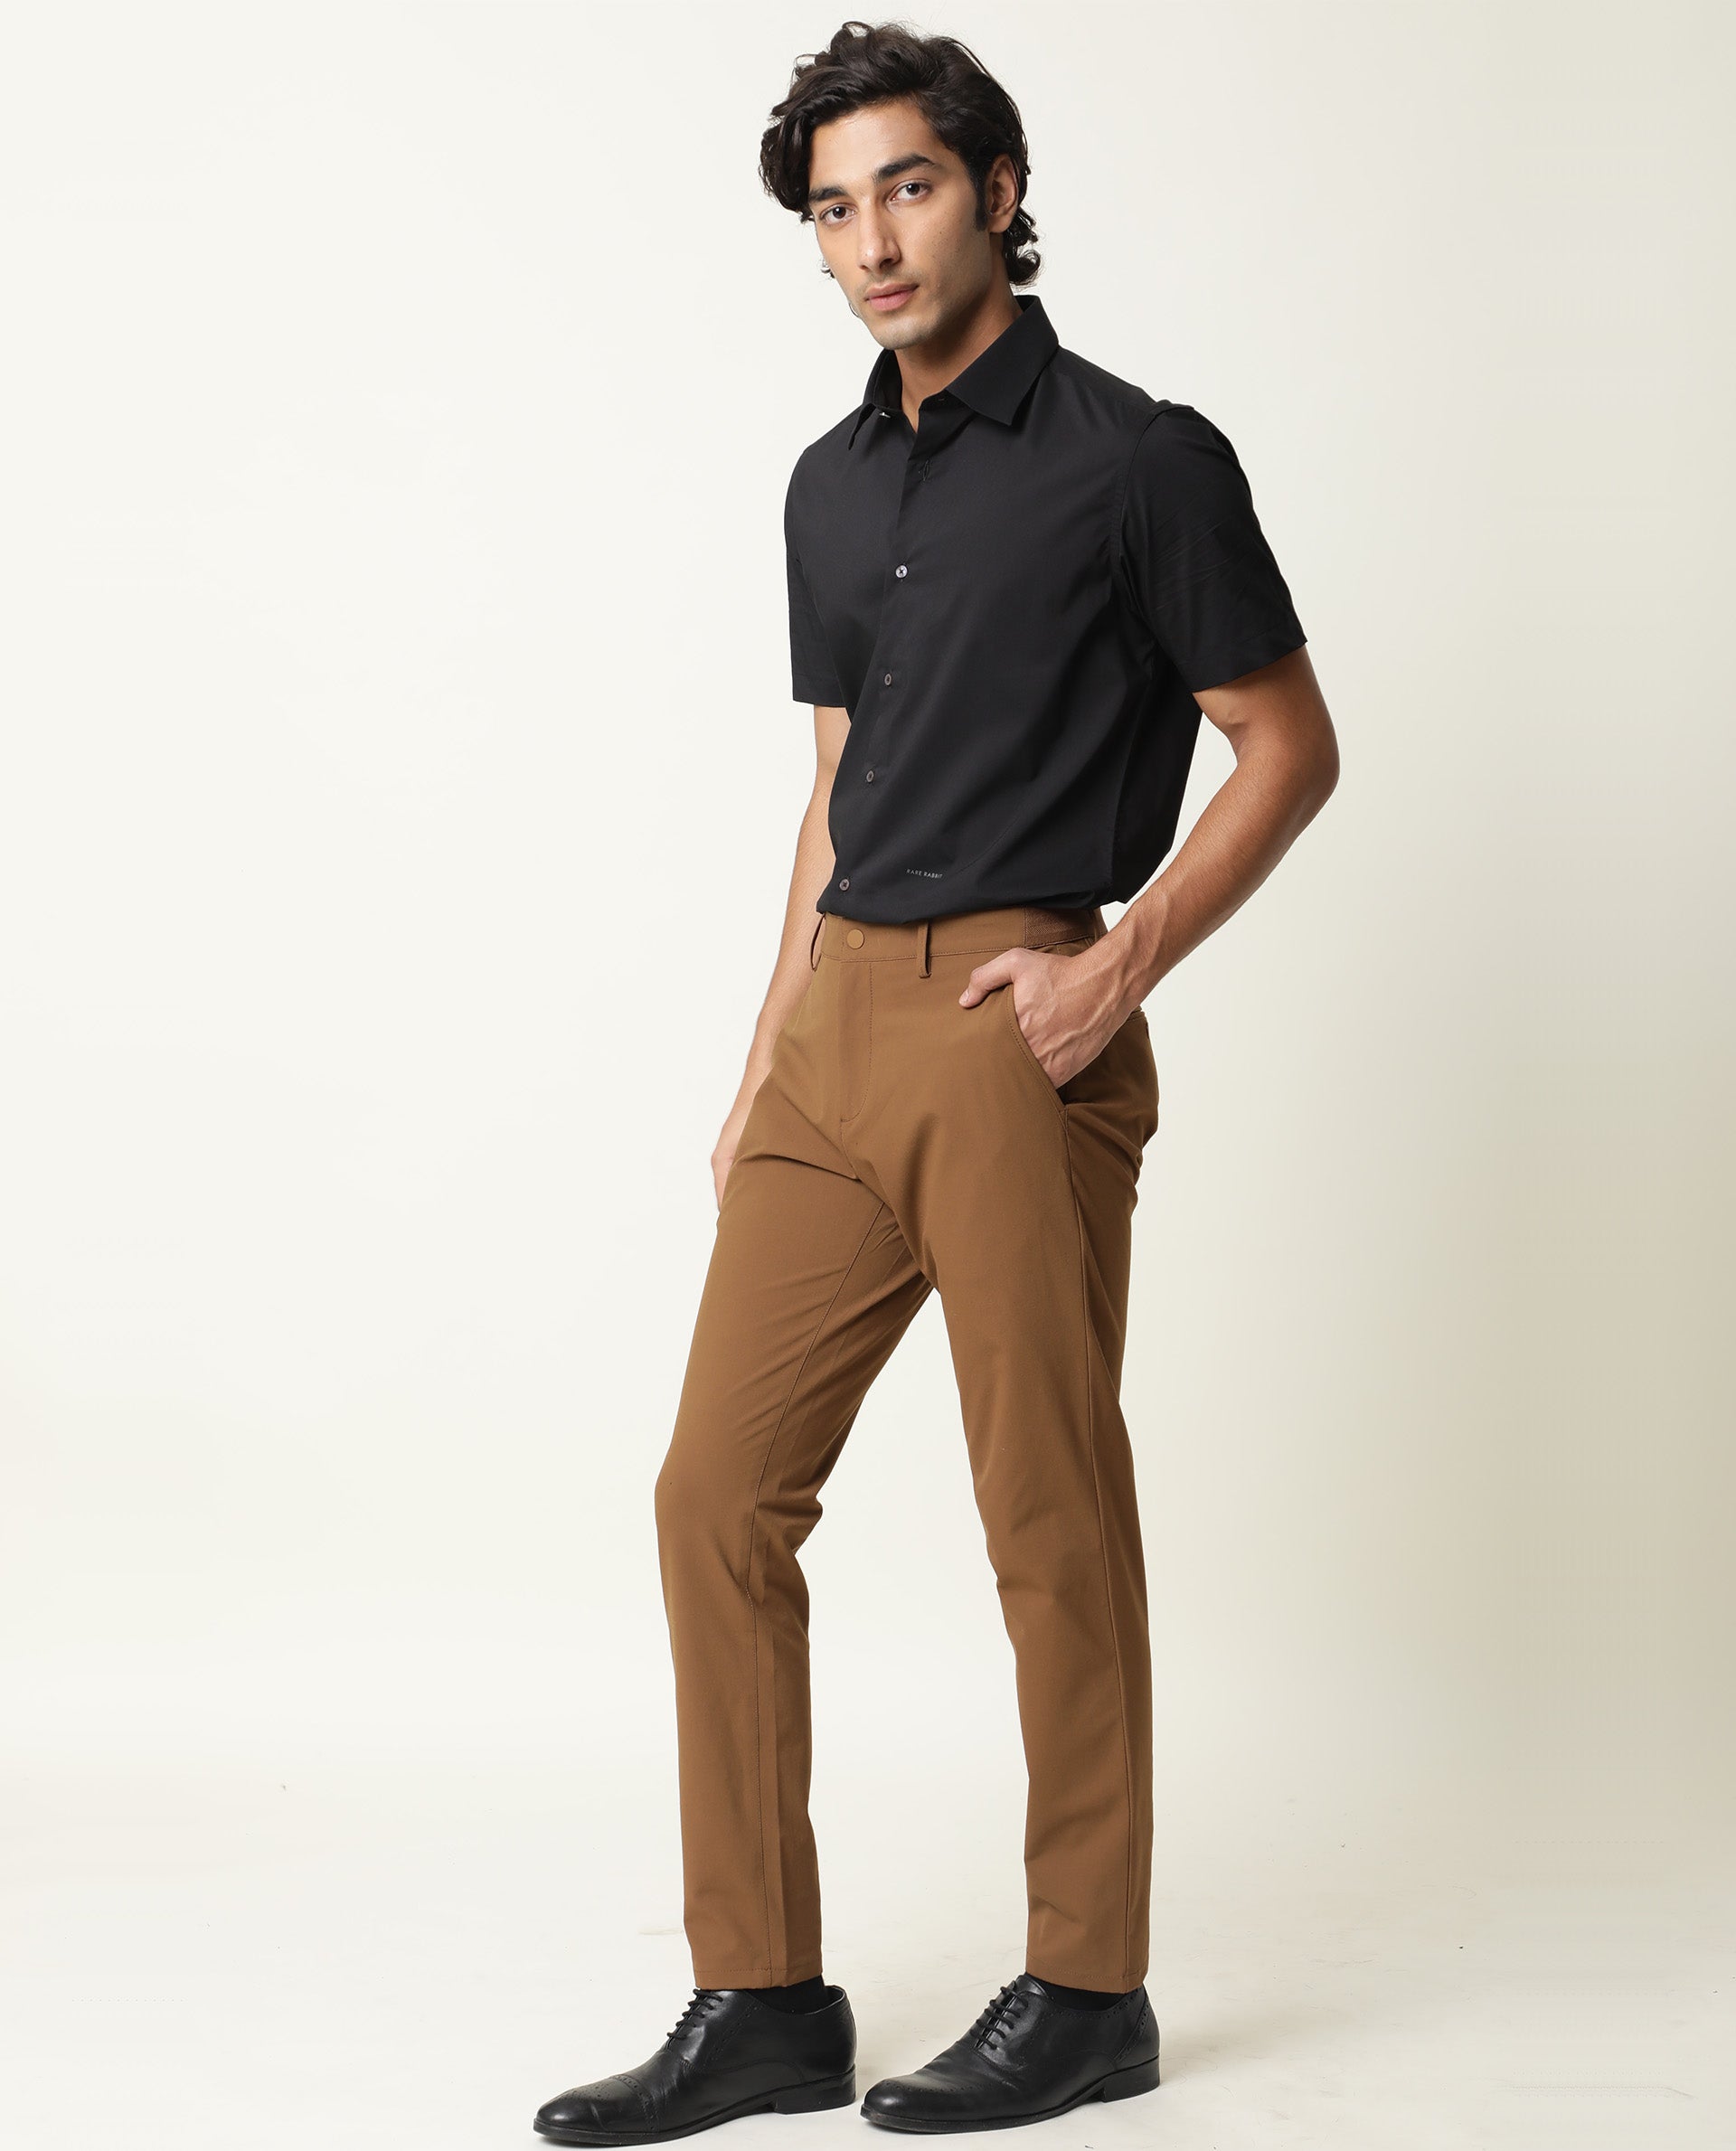 29010 Black Shirt Brown Pants Stock Photos HighRes Pictures and Images   Getty Images